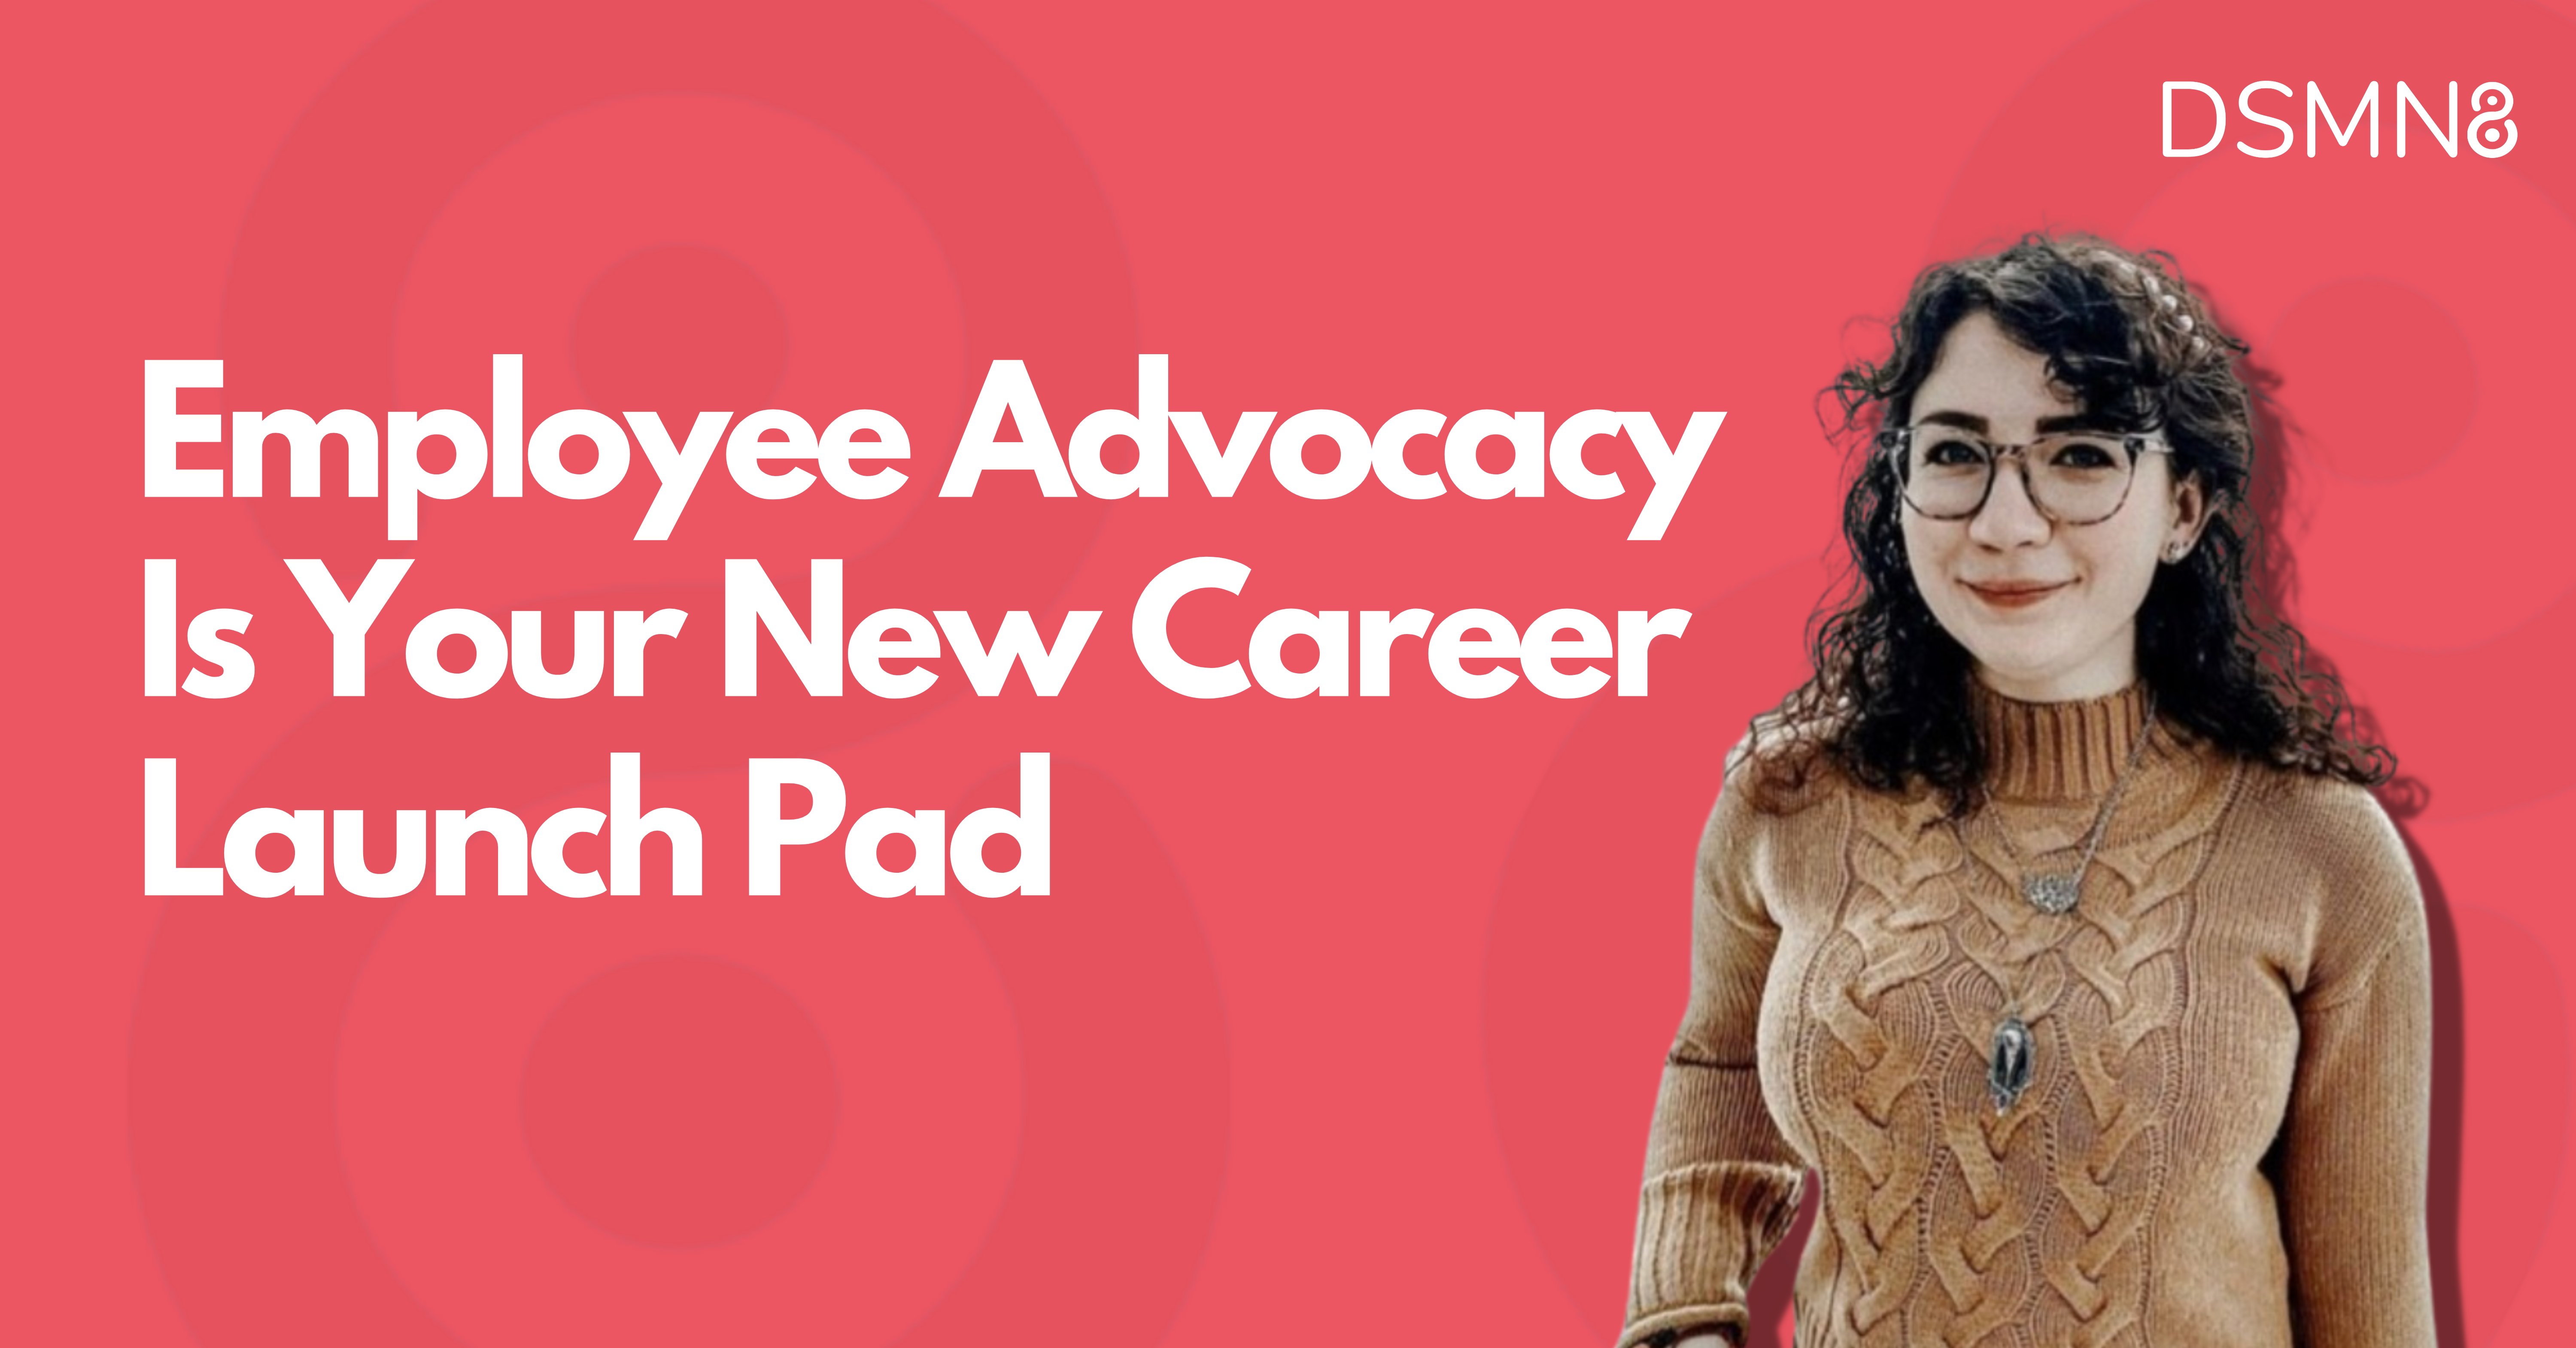 Employee Advocacy Is Your New Career Launch Pad